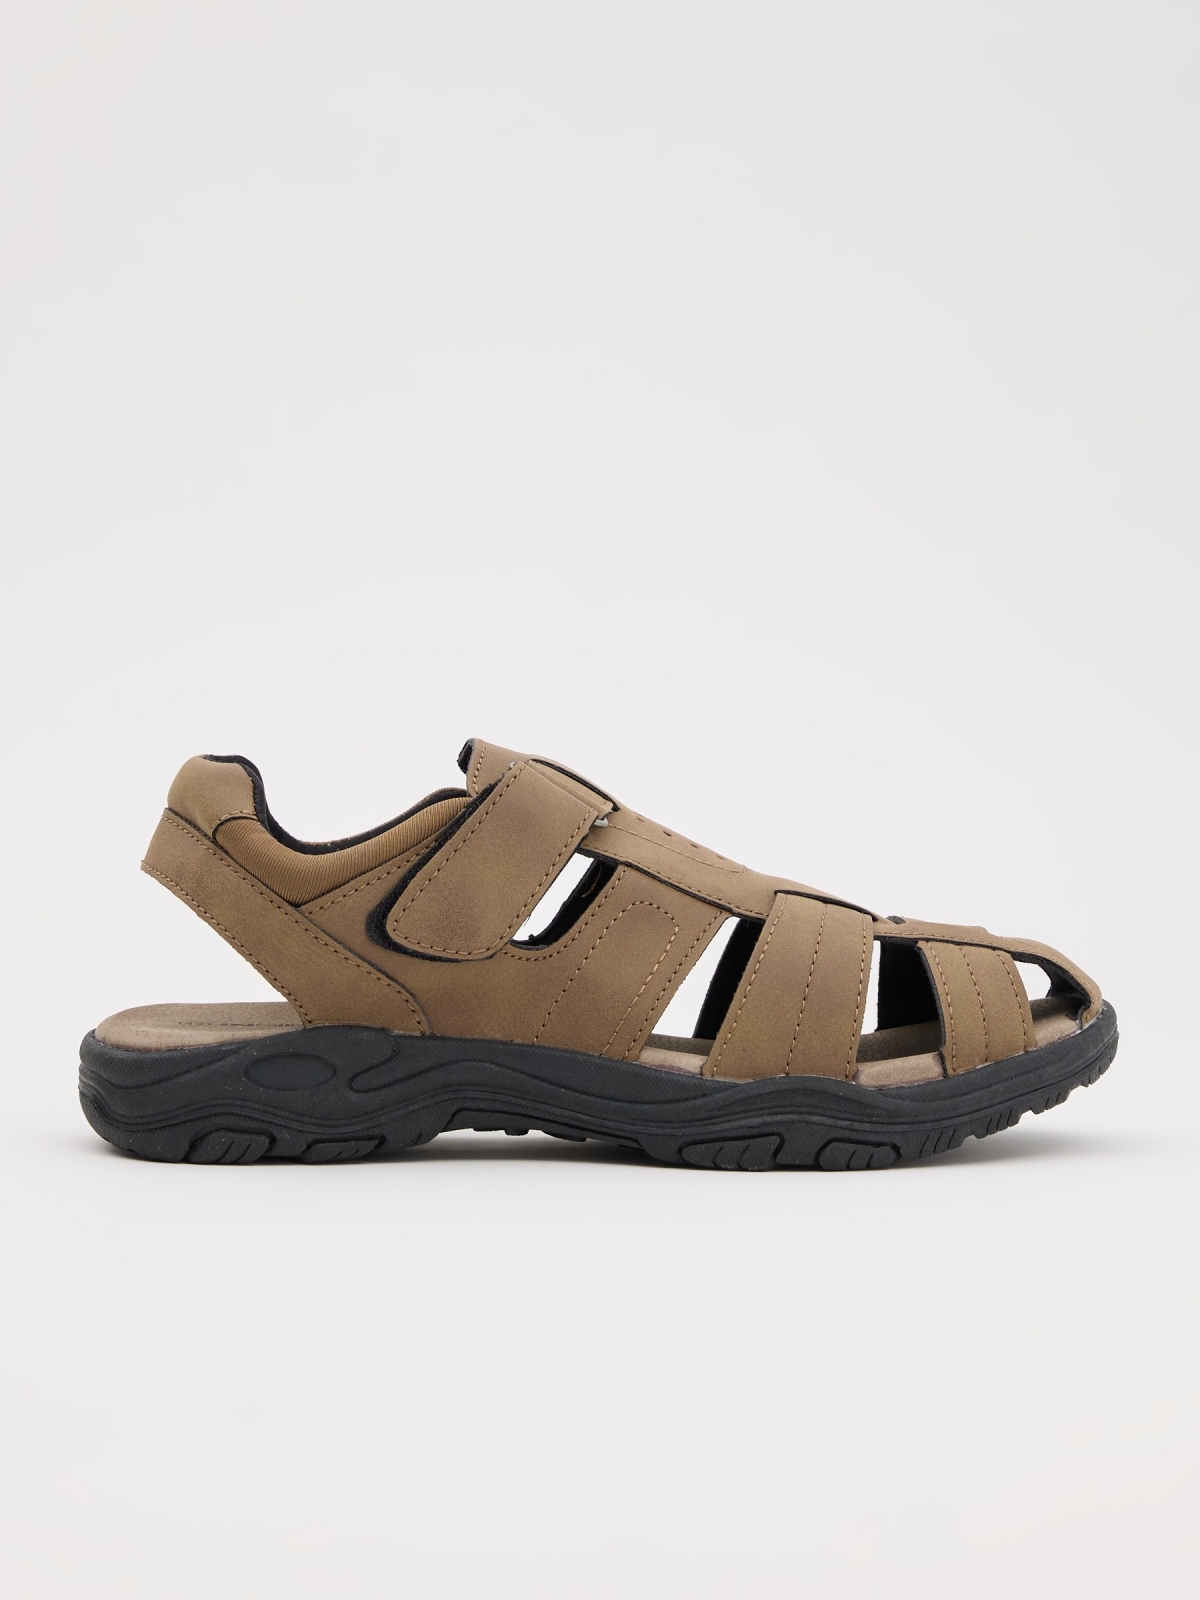 Crab sandals with velcro light brown